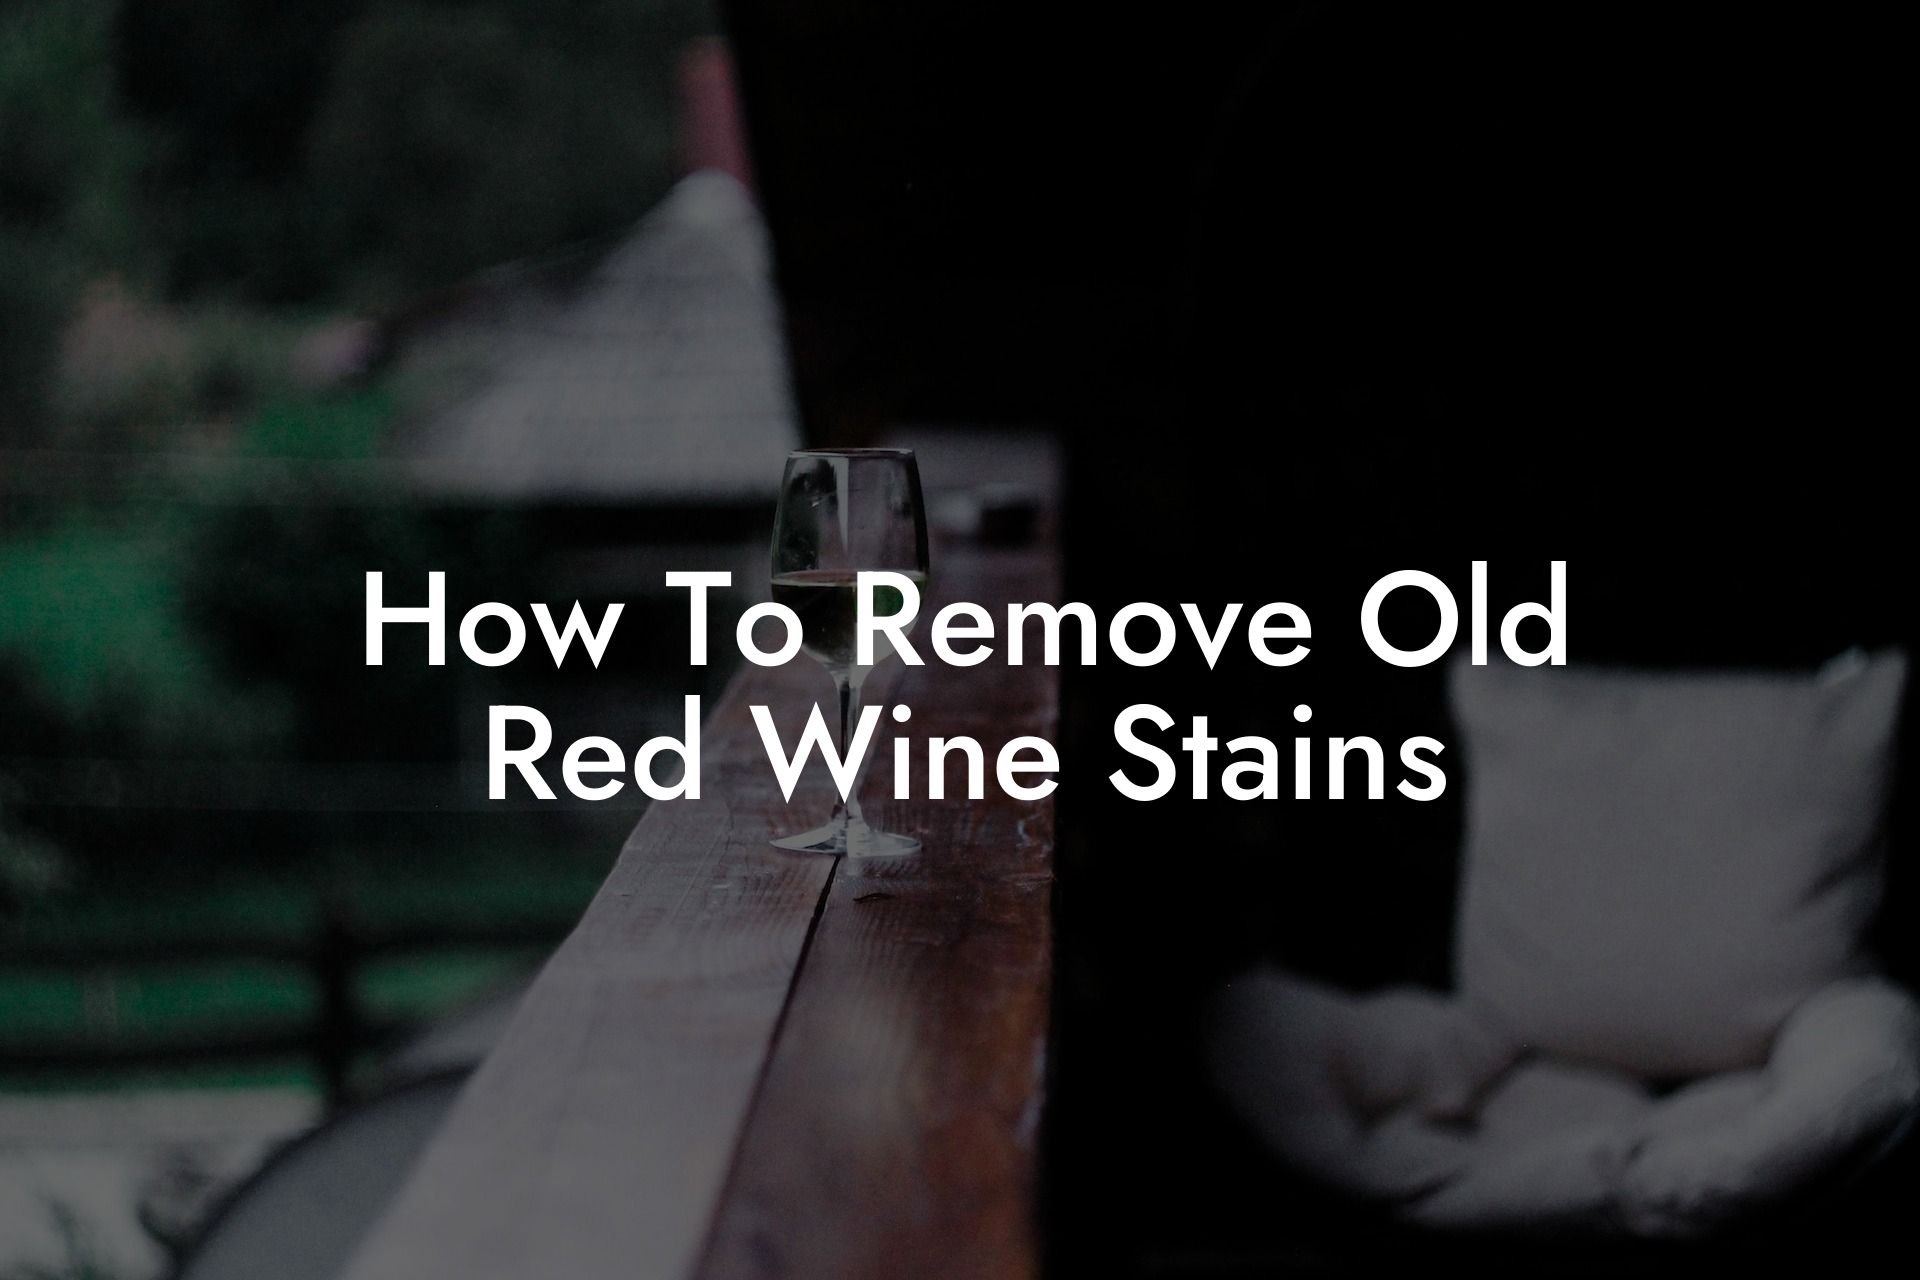 How To Remove Old Red Wine Stains